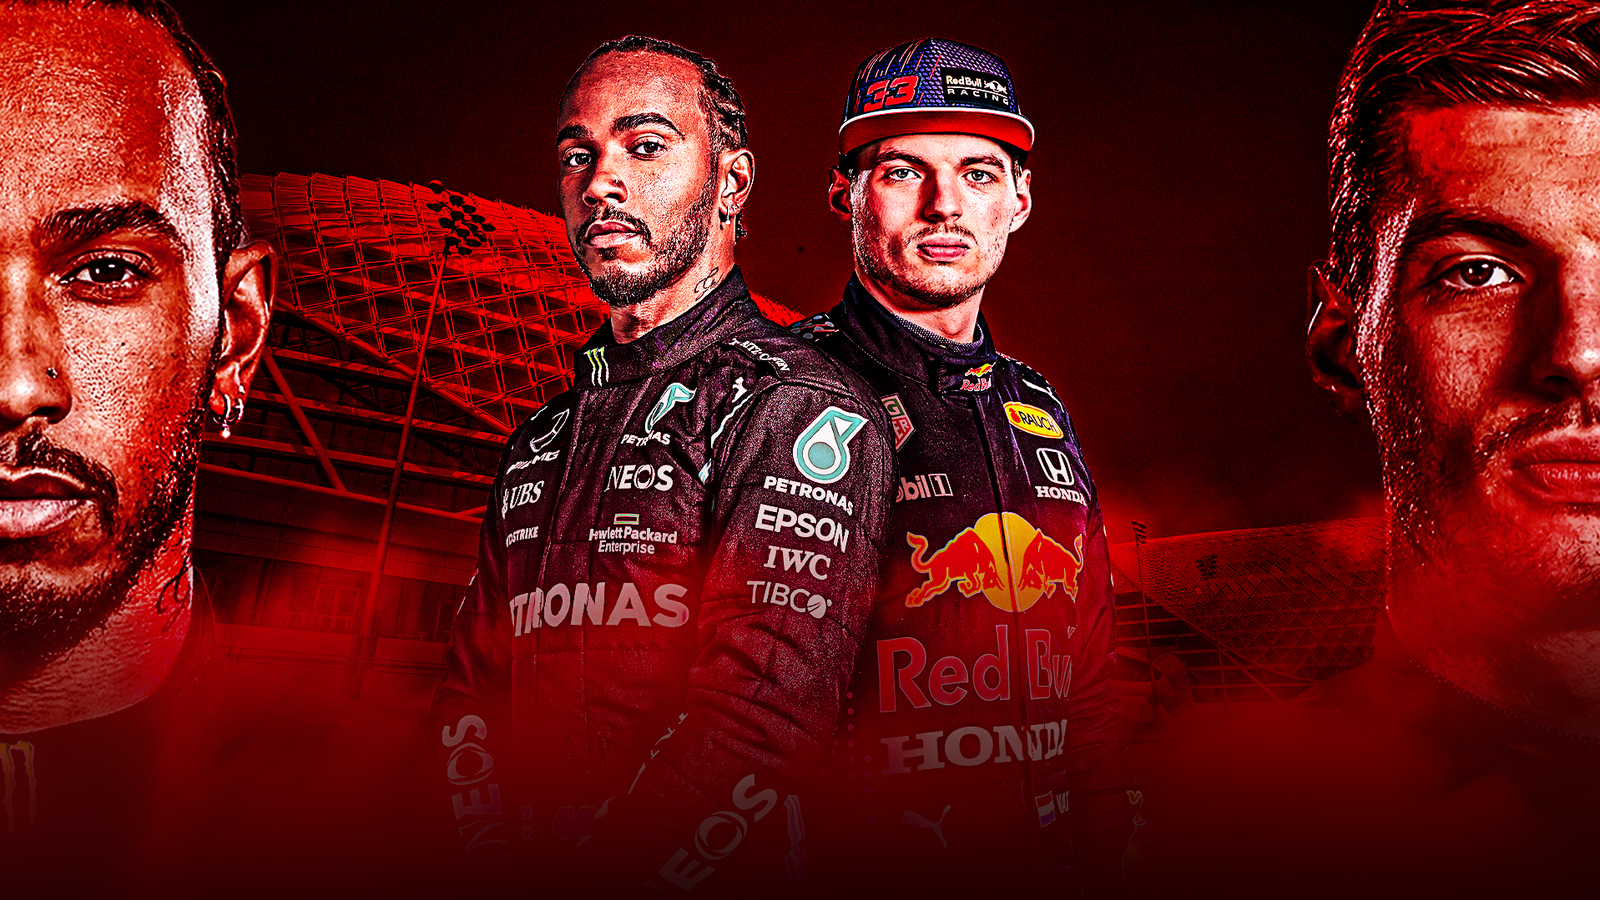 Max Verstappen vs Lewis Hamilton: The story and escalating drama of a remarkable Formula 1 title fight